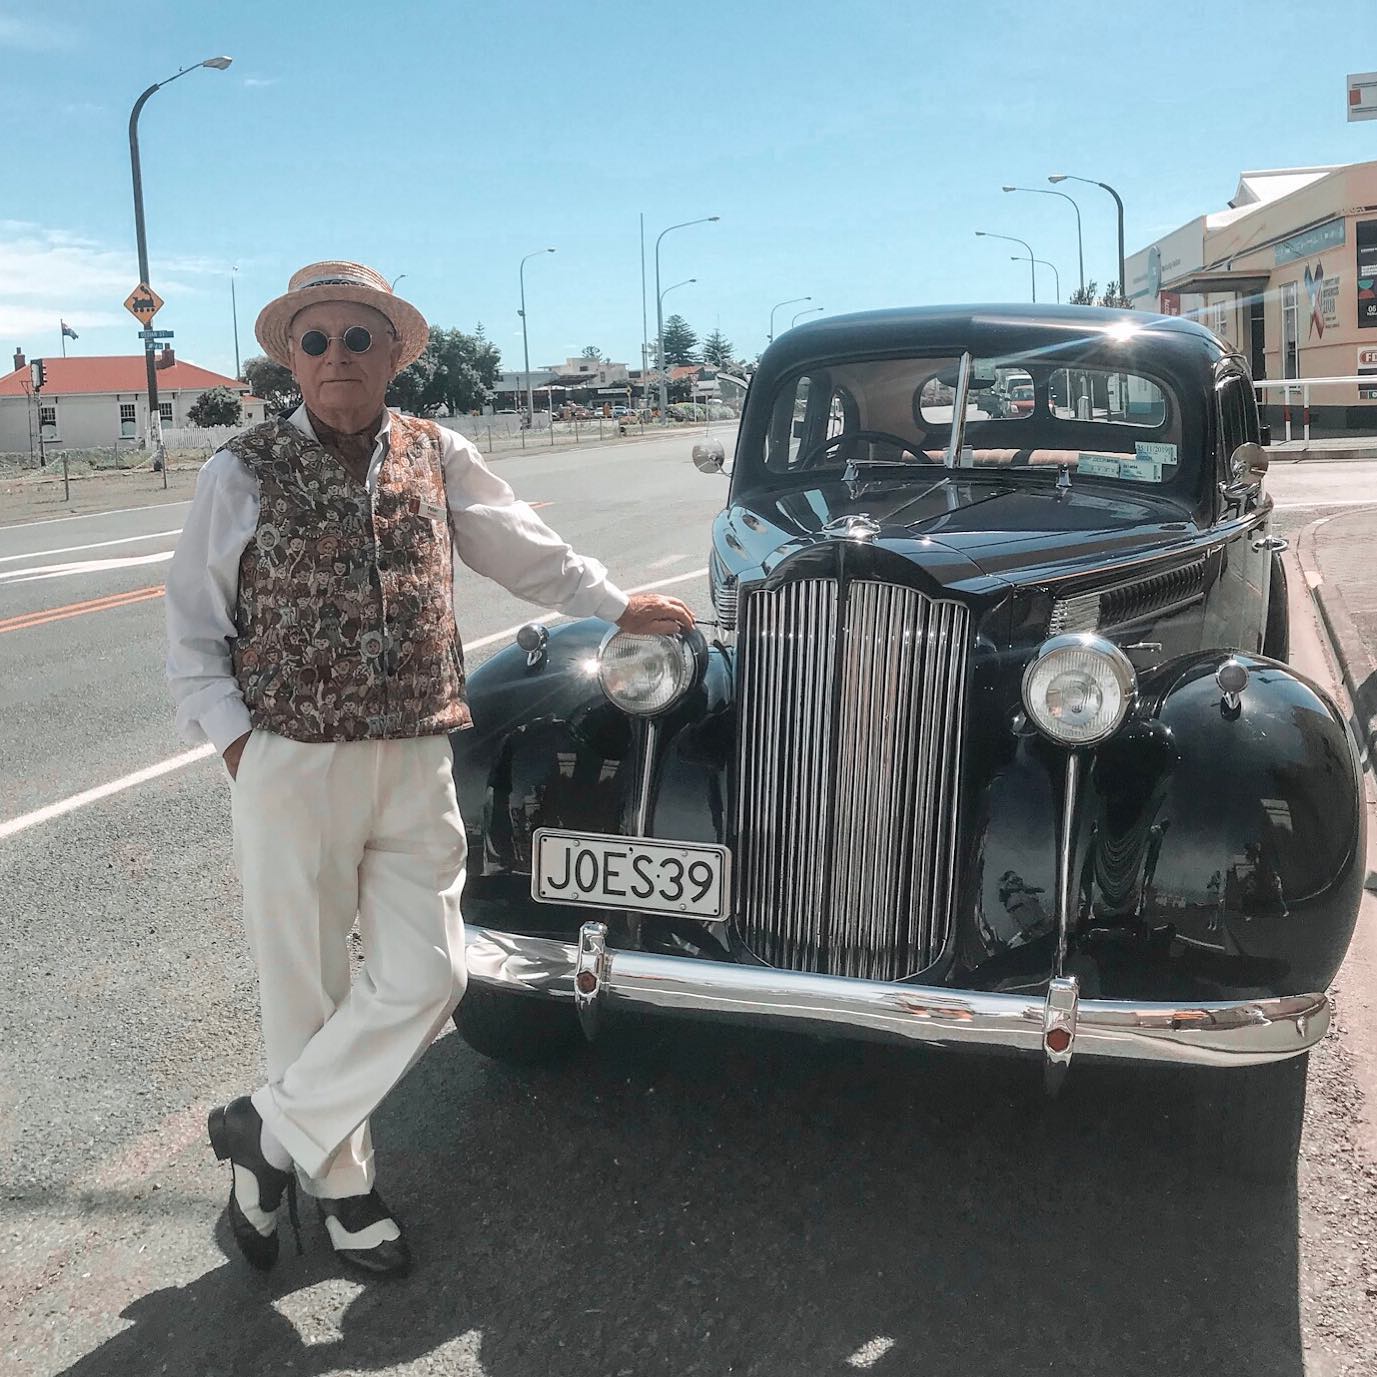 If you ever find yourself in Napier, do yourself a favor and do @art_deco_napier vintage car tour. This is Peter and he is an absolute ripper of a chap with so many stories to tell.

Learning about the recent history of the town and how it has changed so much since the earthquake in 1931!! Go check it out! @hawkesbaynz @napiercity @purenewzealand 
#goodmorningworldnzsp #napier #hawkesbay #artdeco #newzealand #nzmustdo #northisland #purenewzealand